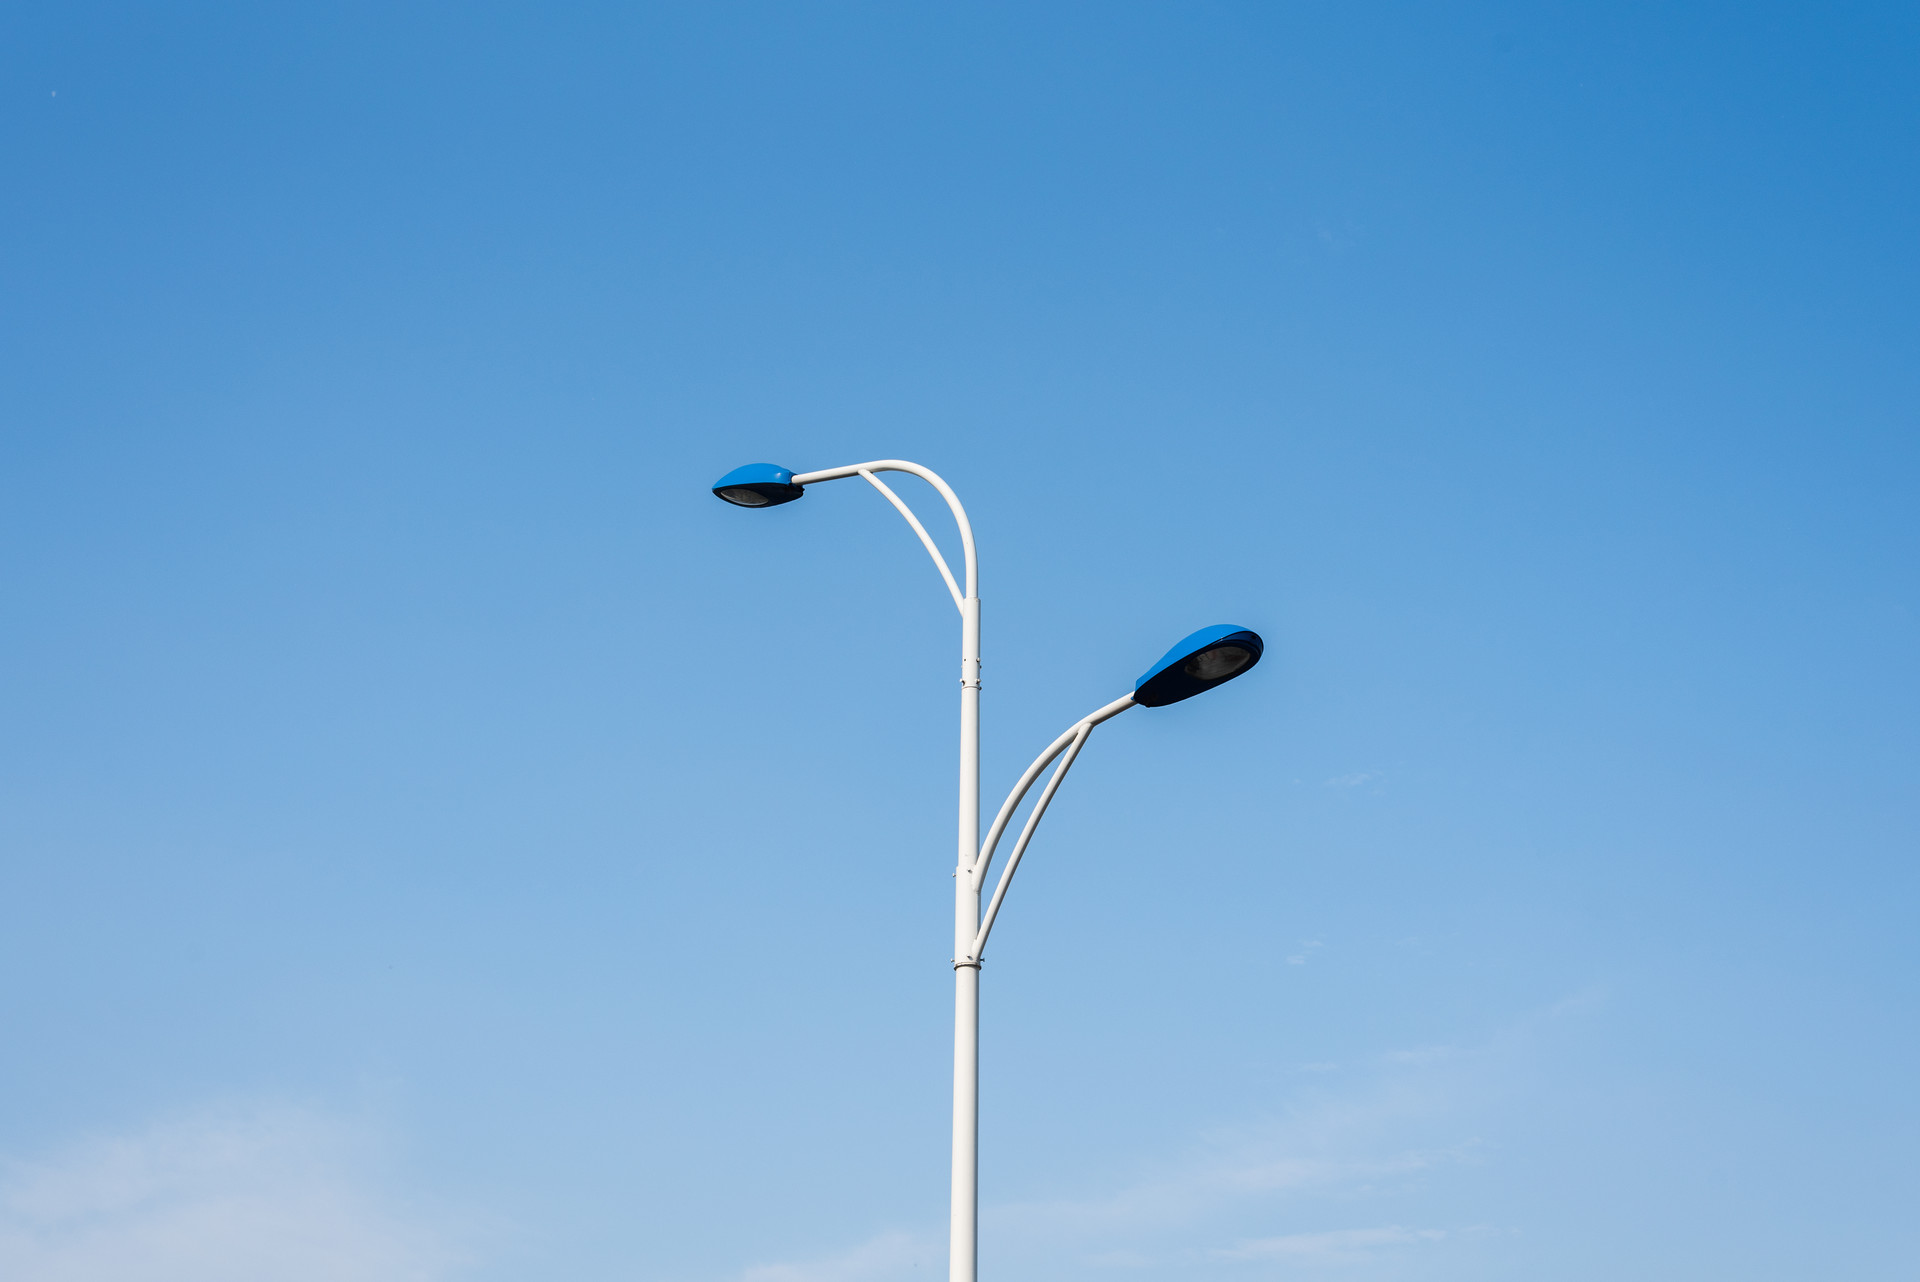 What Are Recommendable Channels for Purchasing New LED Street Lamp?